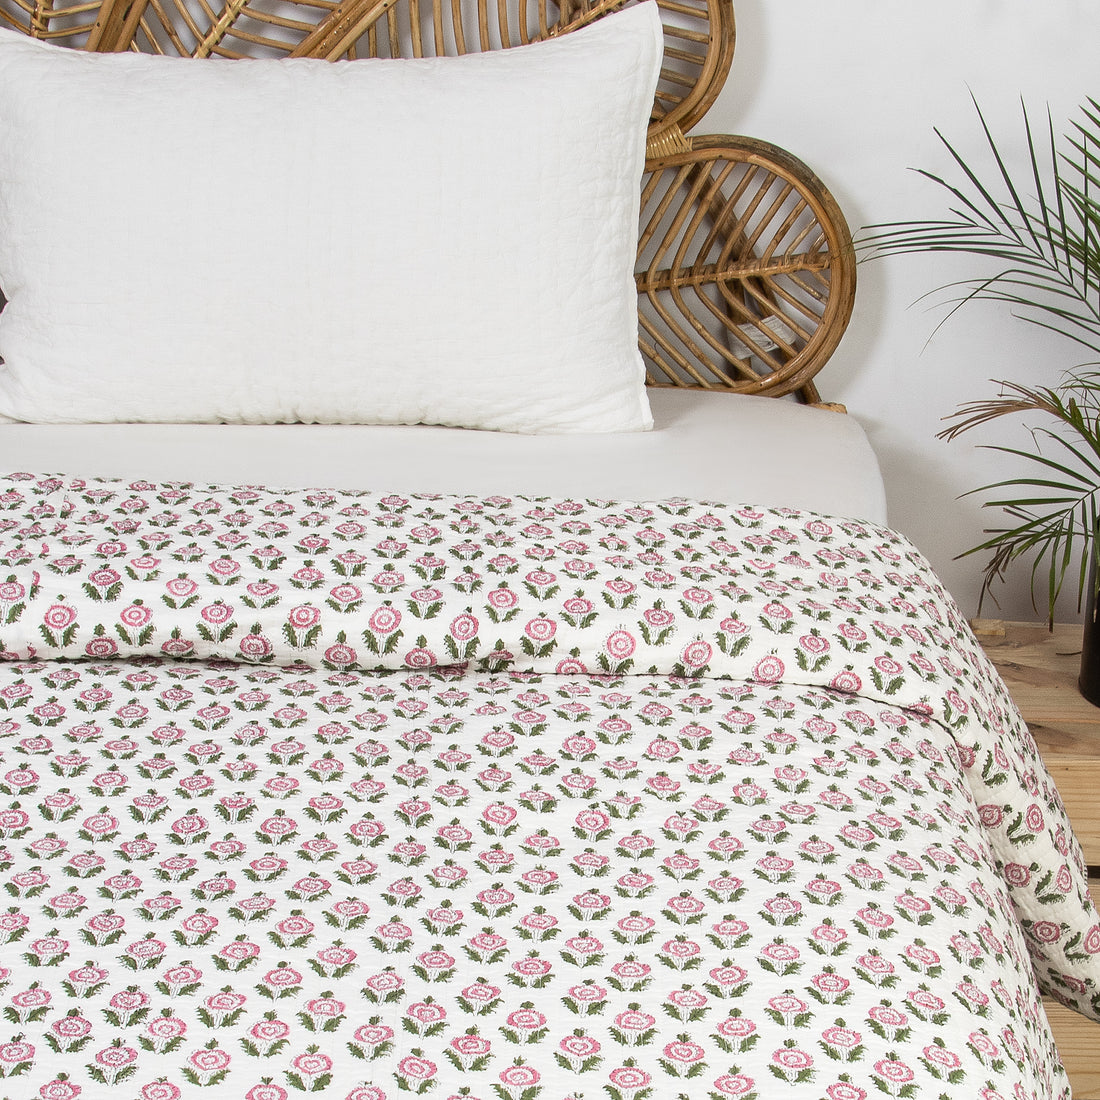 Multicolor Floral Printed Cotton Machine Bed Quilts Online